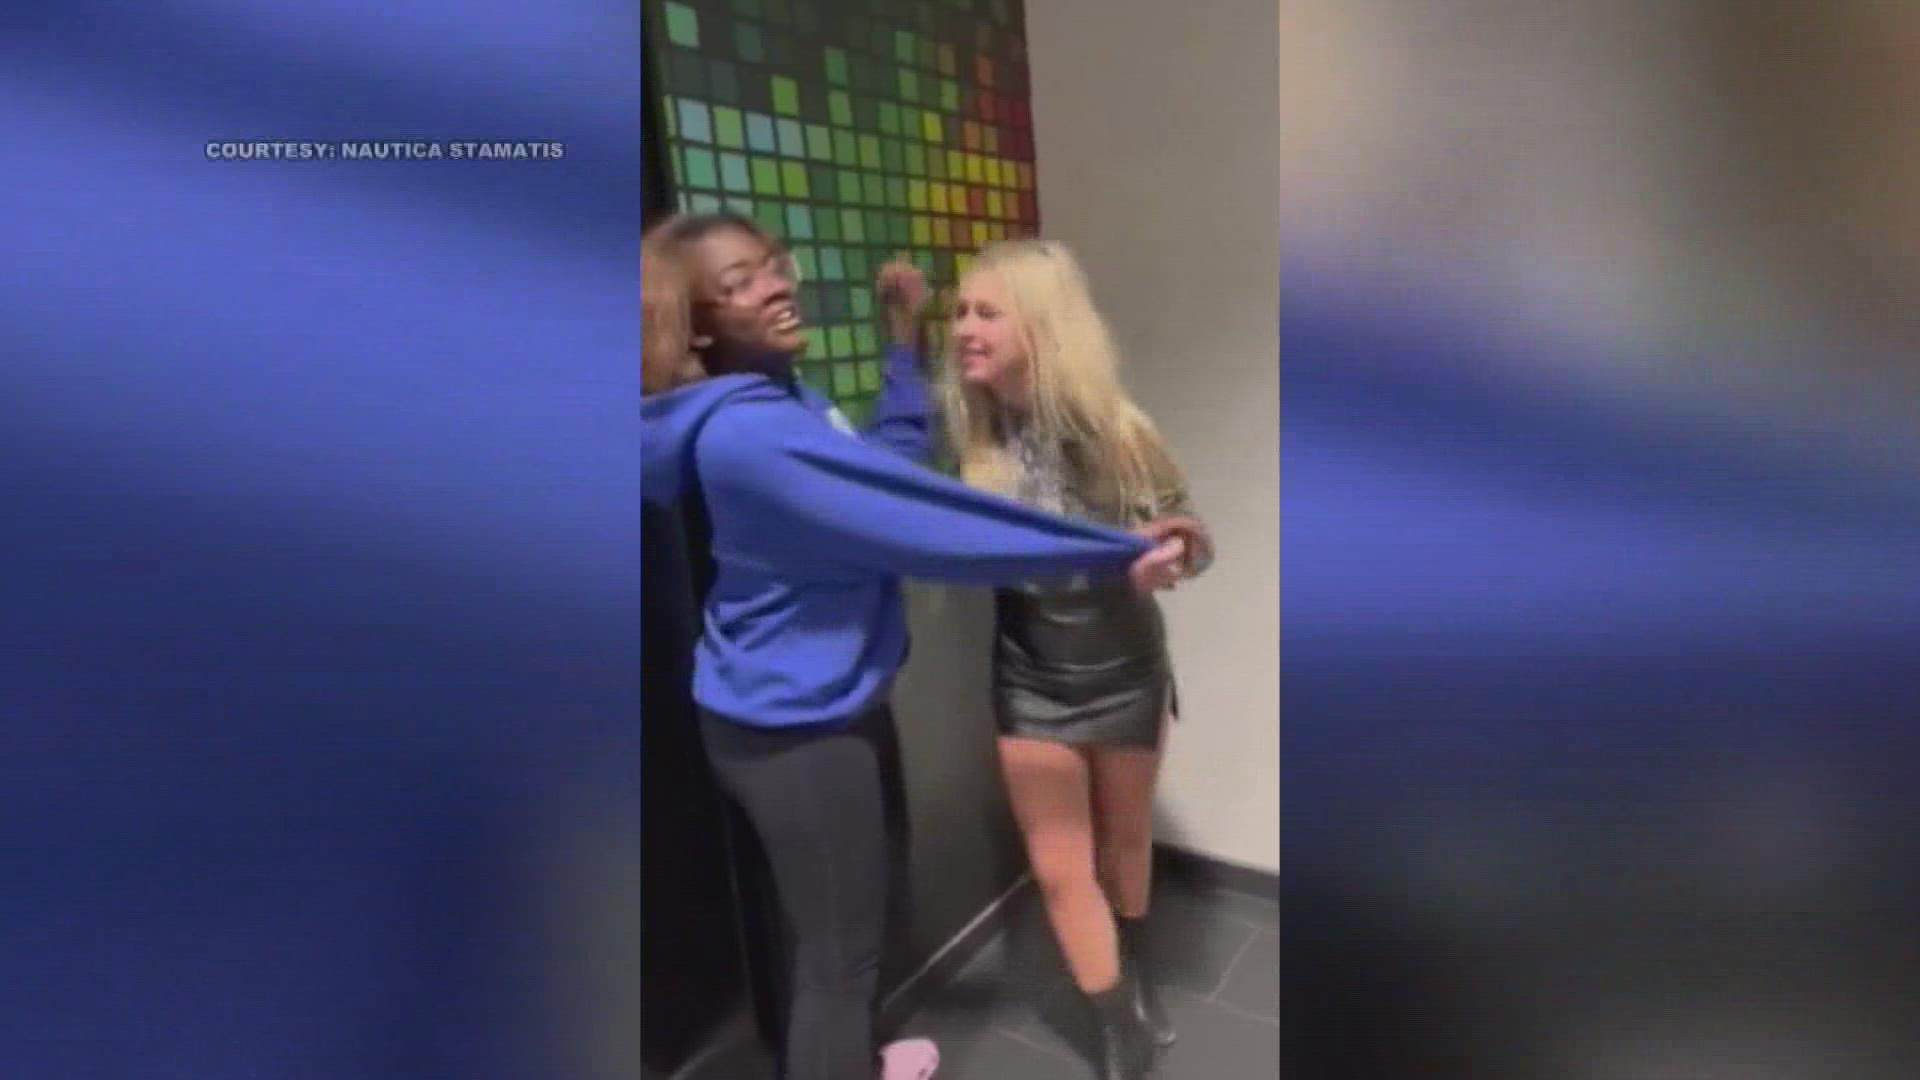 In the video, University of Kentucky senior Sophia Rosing is seen yelling racial slurs at a Black student working at in a campus residence hall.